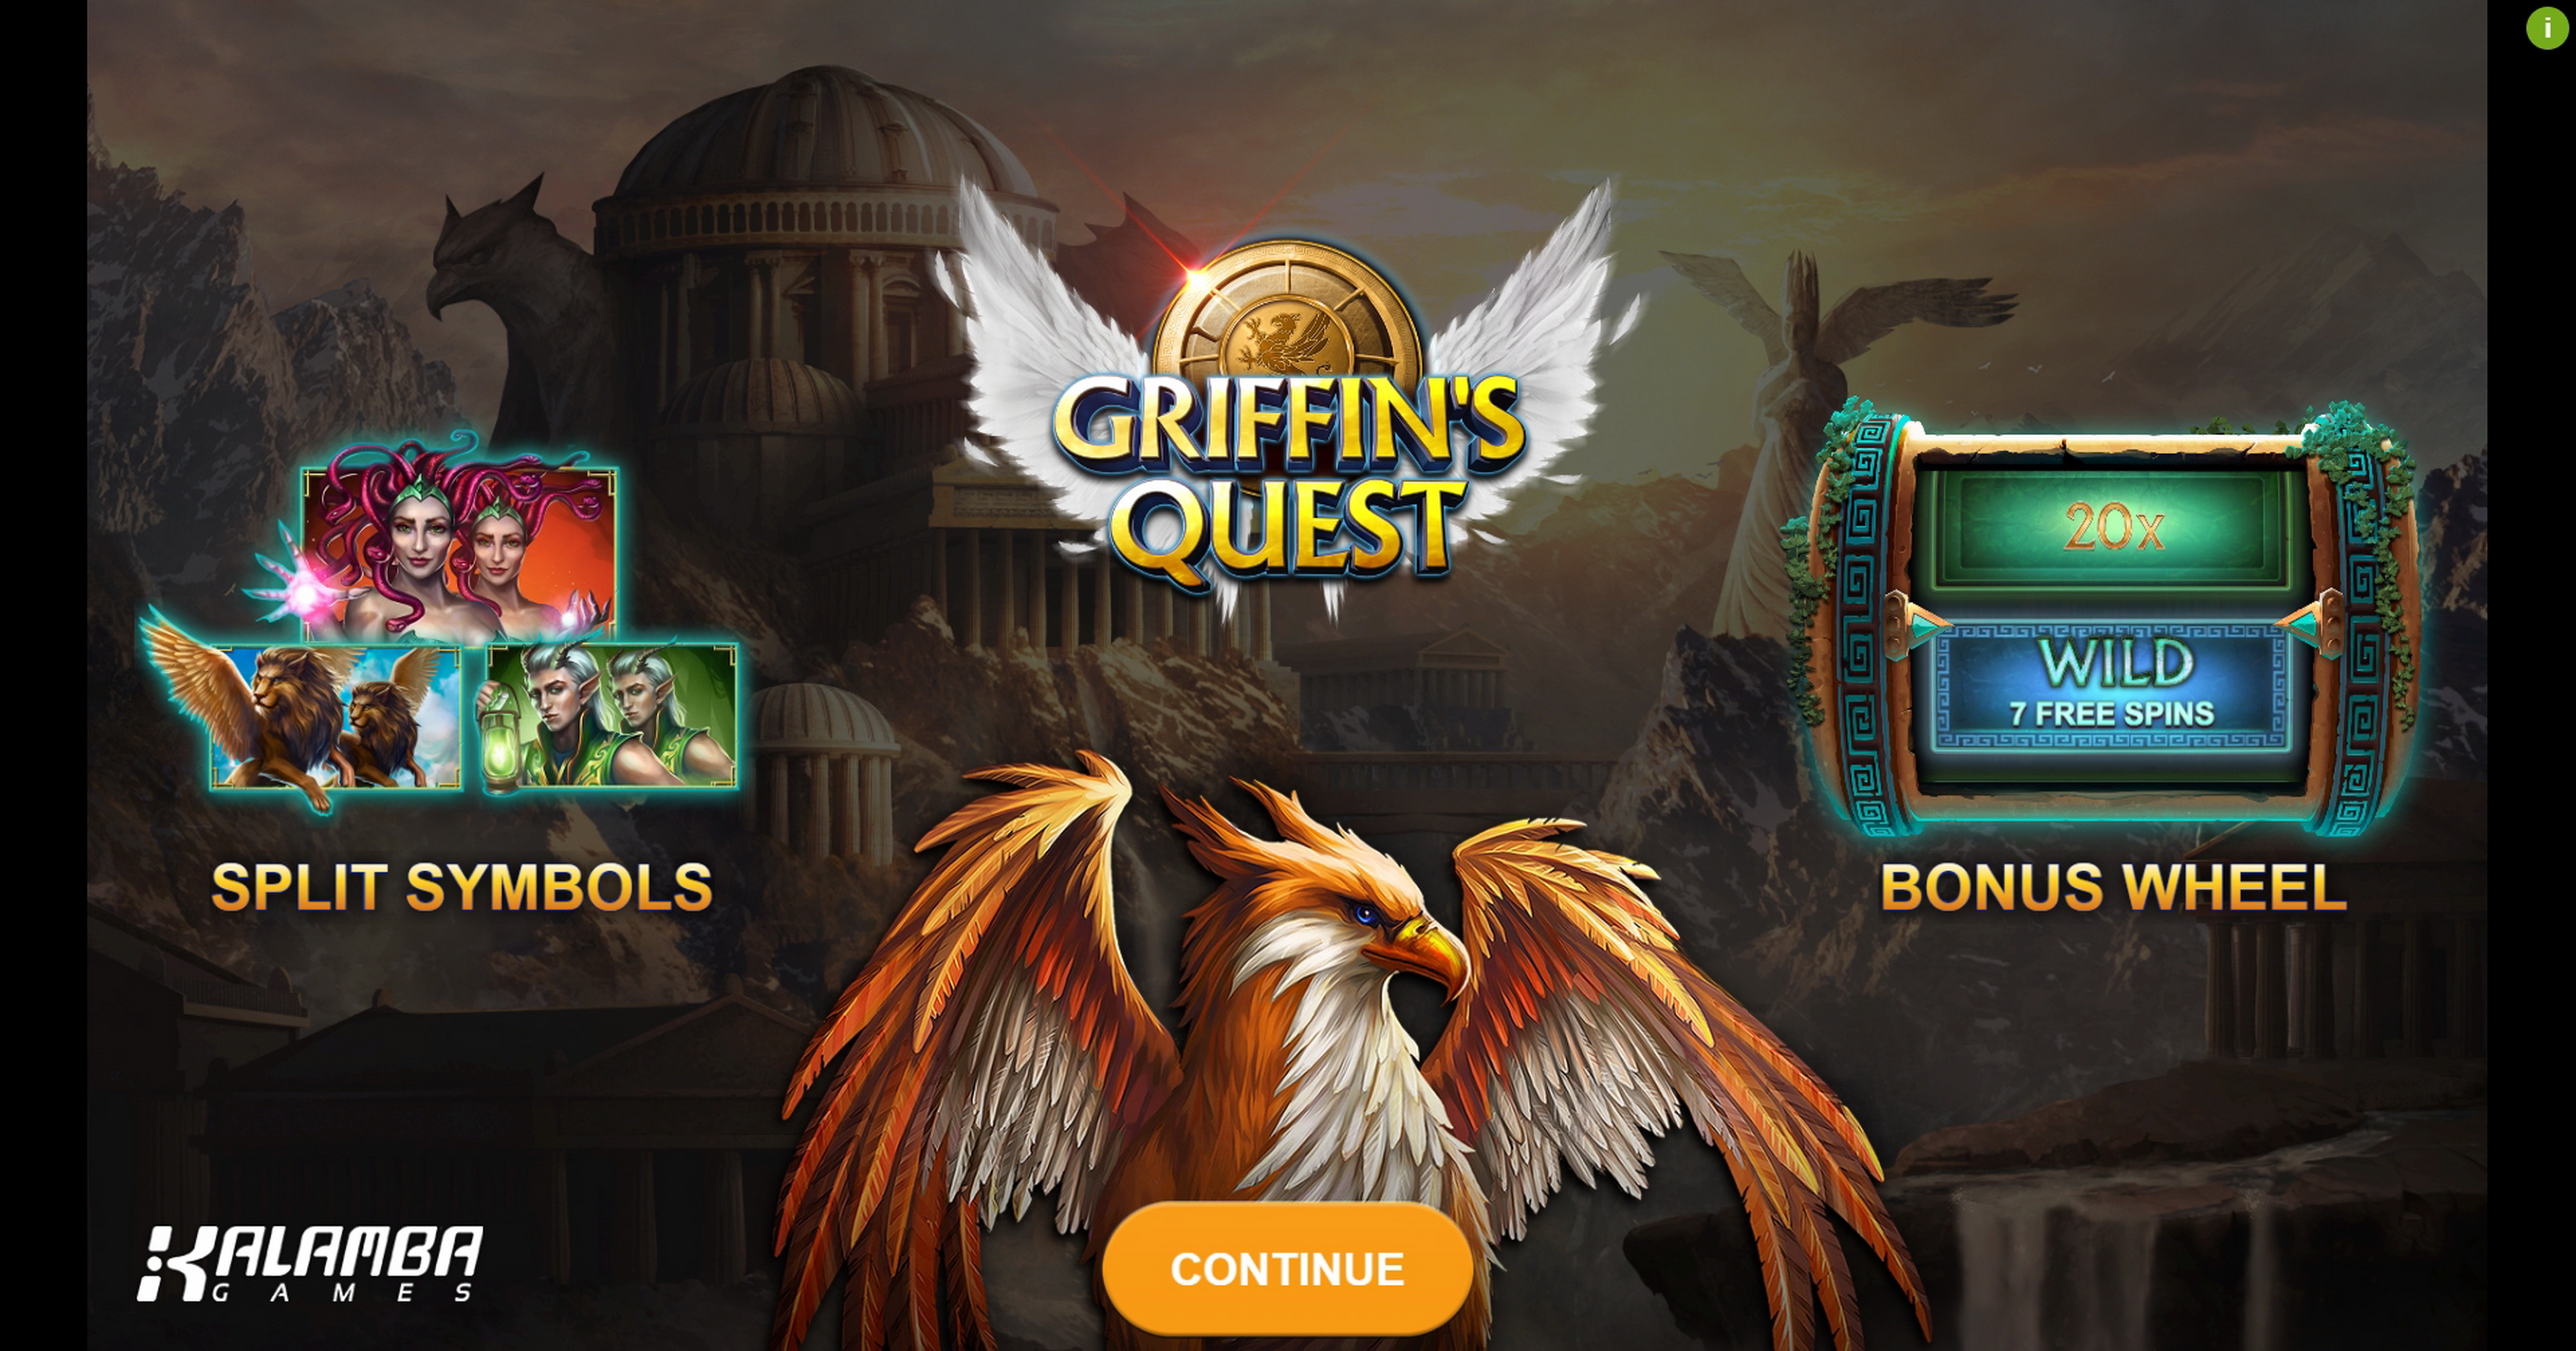 Play Griffins Quest Free Casino Slot Game by Kalamba Games